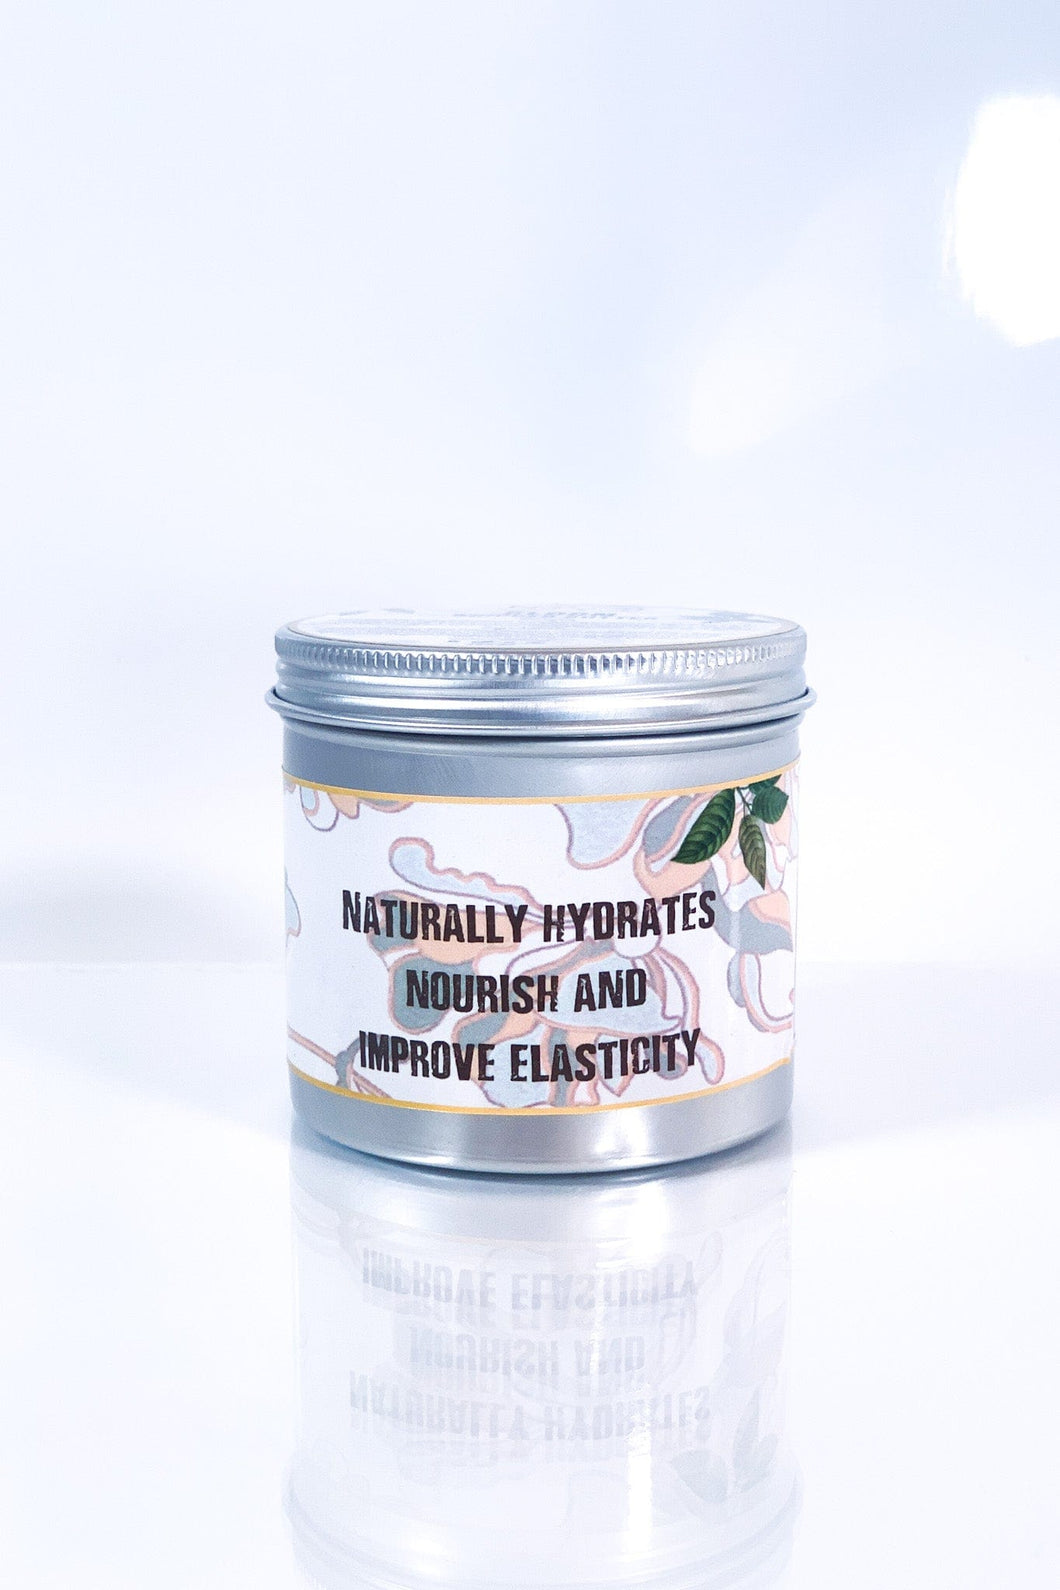 NOURISHING  MULTI-FUNTIONAL WHIPPED BUTTER - Shop handmade Haircare, skincare & Wellness products online - Nafsi Botanicals